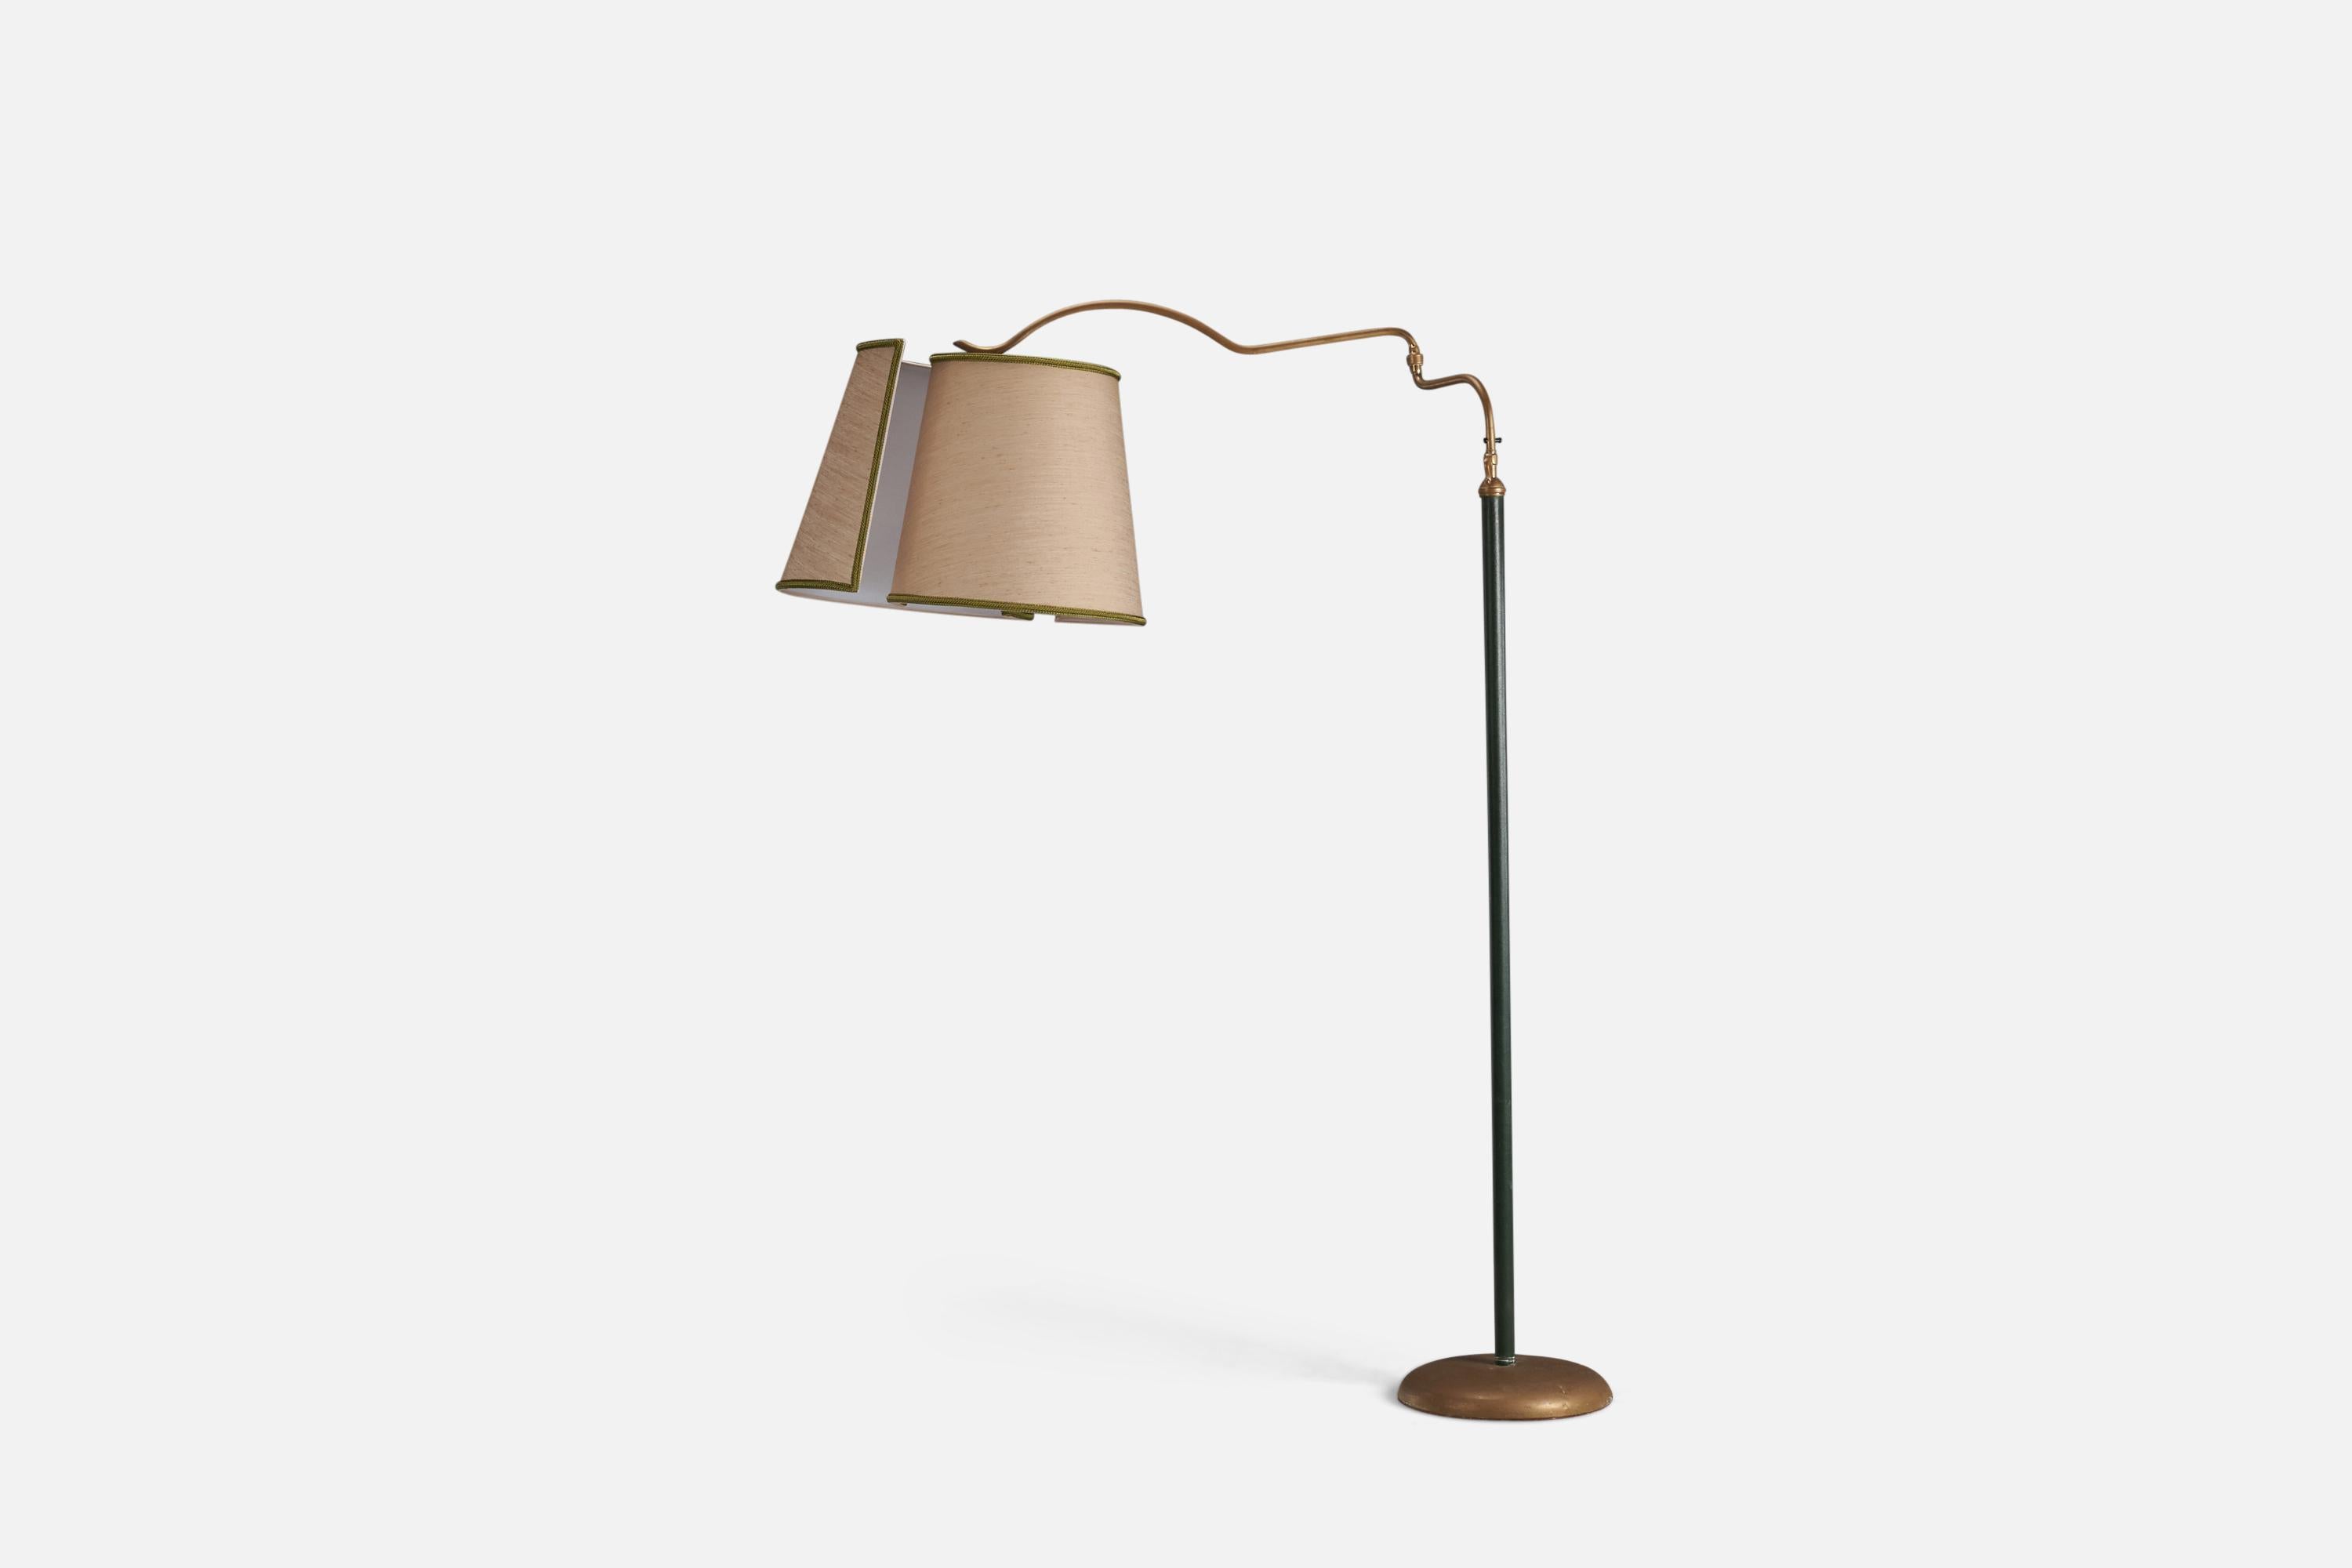 A brass, leatherette and fabric floor lamp designed and produced by an Italian Designer, Italy, 1940s.

Socket takes standard E-26 medium base bulb.

There is no maximum wattage stated on the fixture.